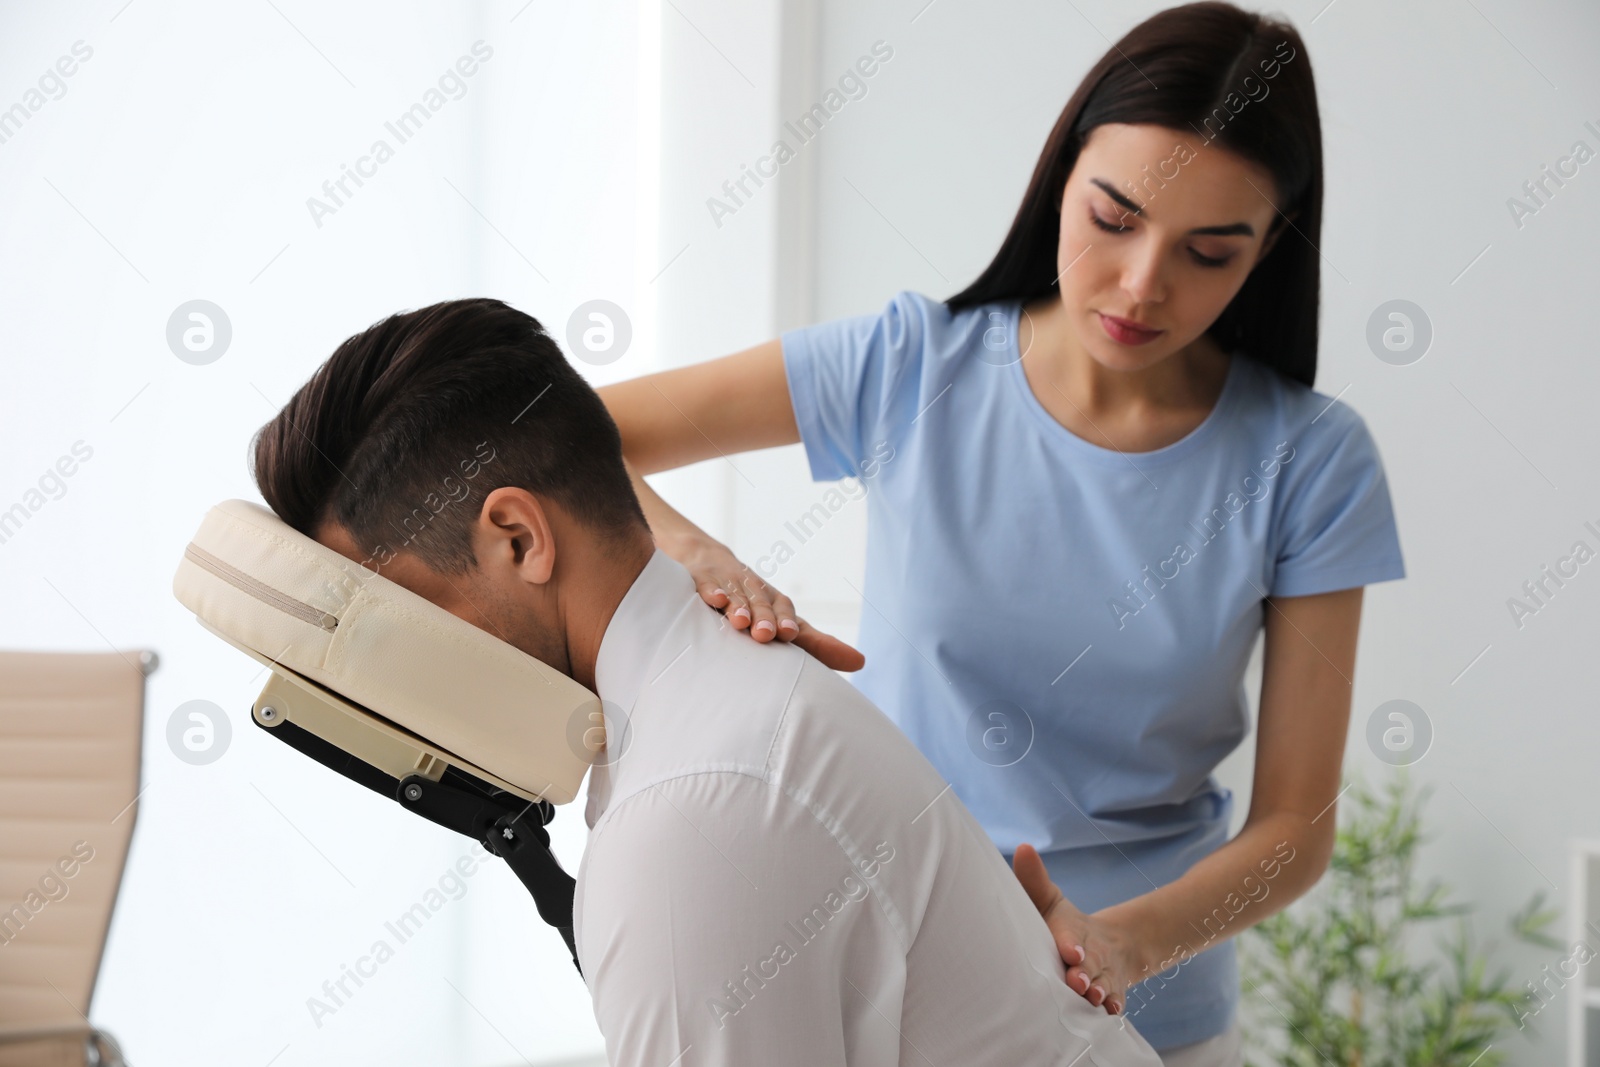 Photo of Man receiving massage in modern chair indoors